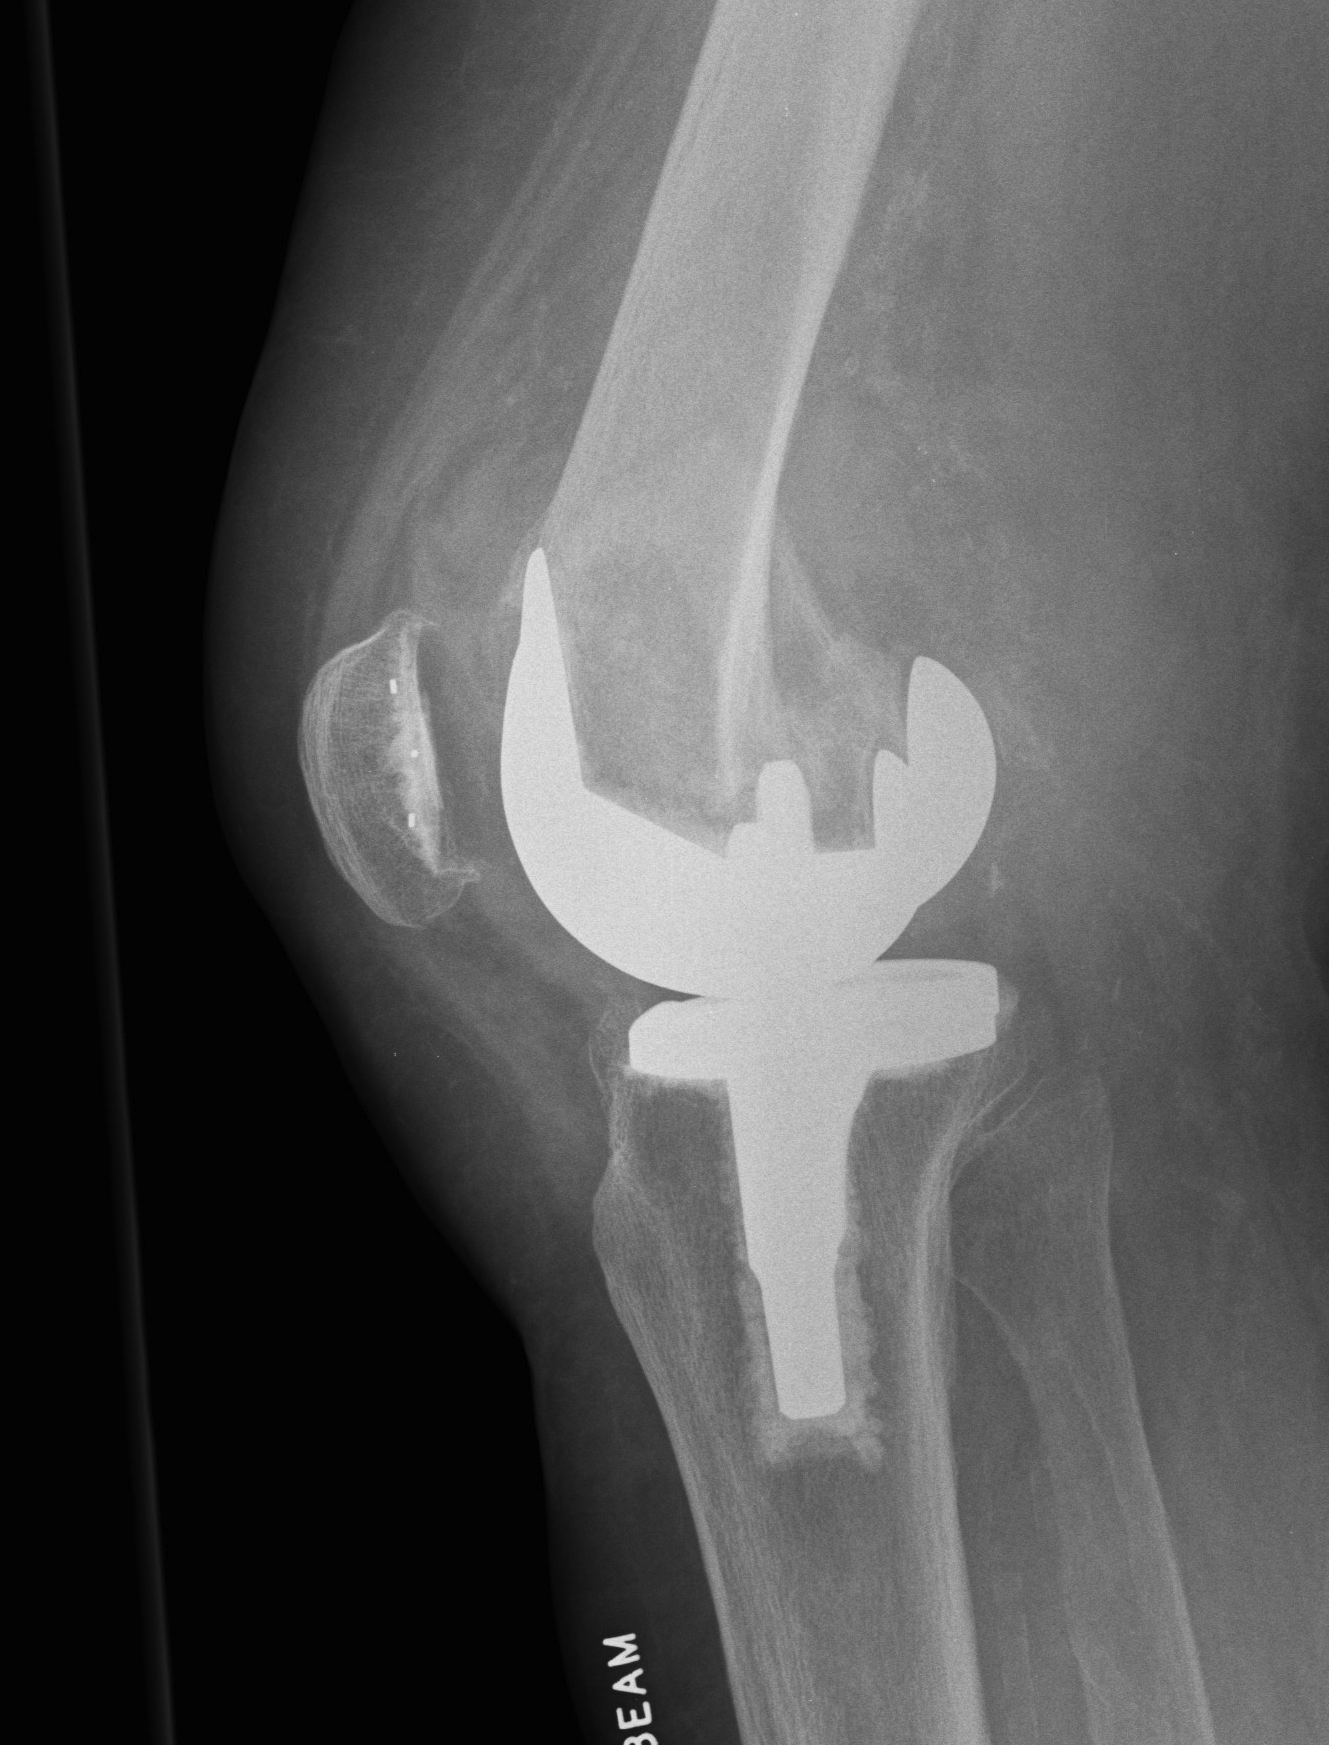 TKR Periprosthetic Fracture Lateral